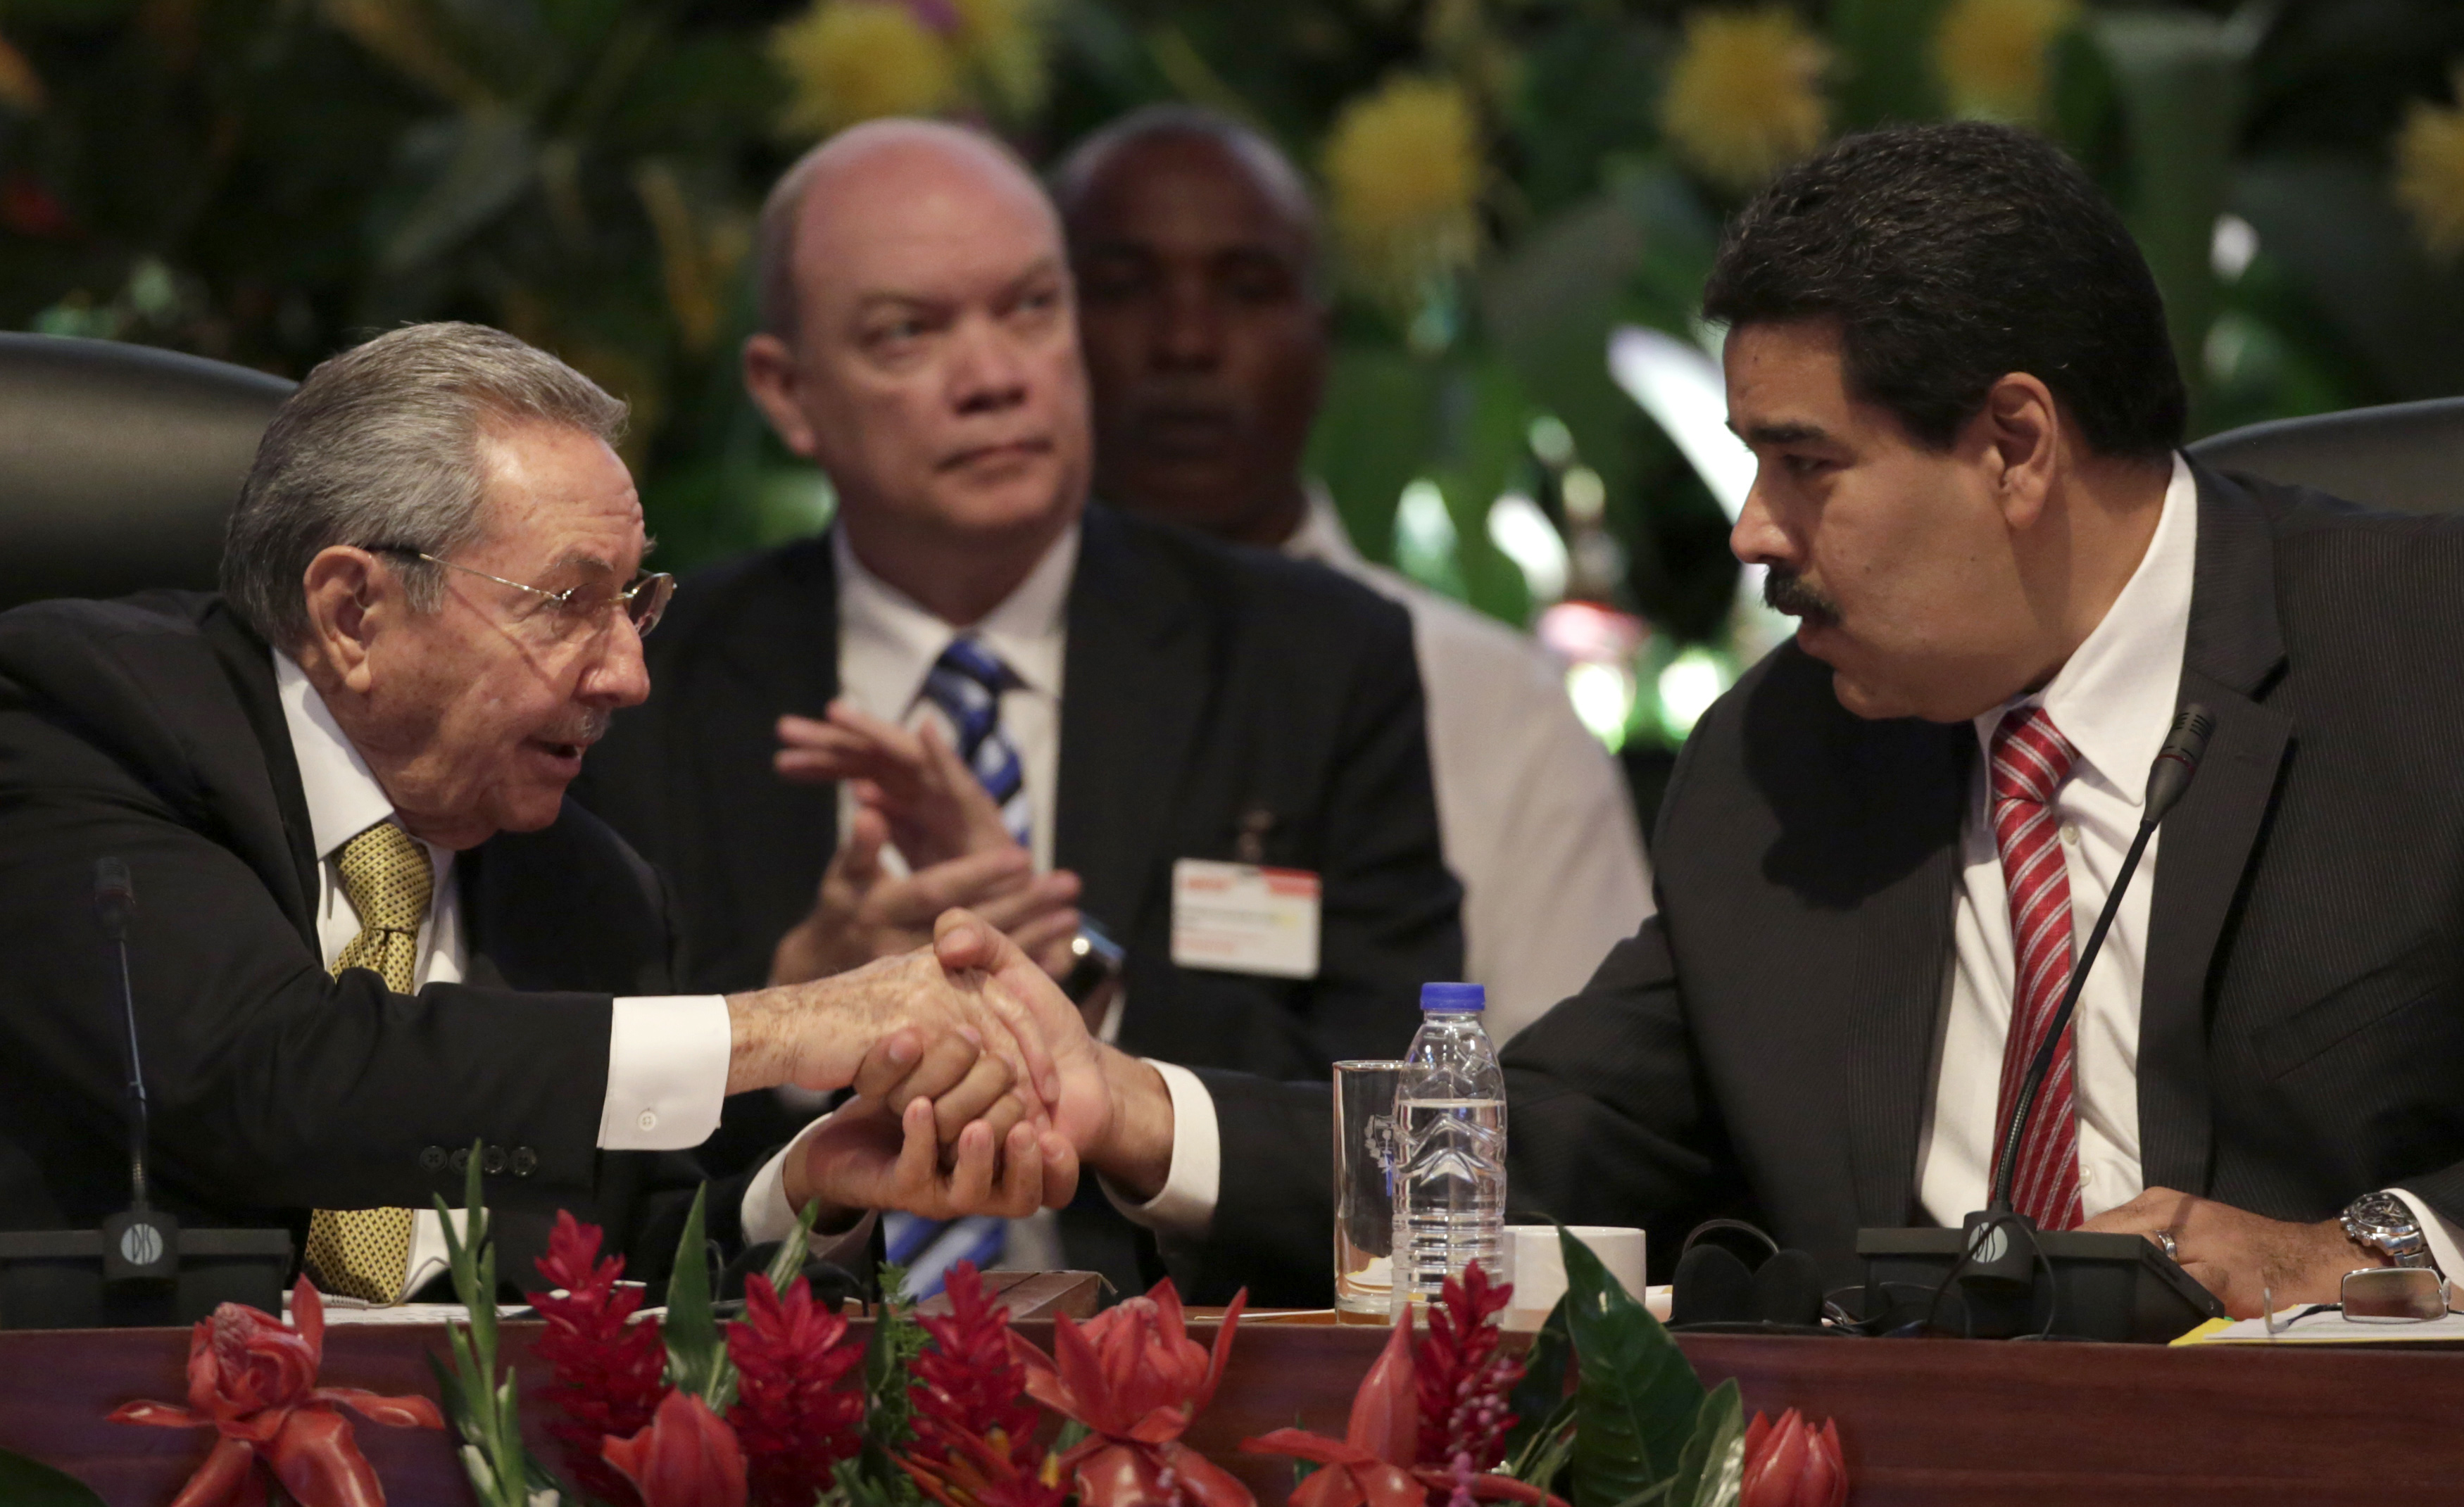 Cuba's President Raul Castro shakes hands with Venezuela's President Nicolas Maduro during the opening session of the 10th ALBA alliance summit in Havana